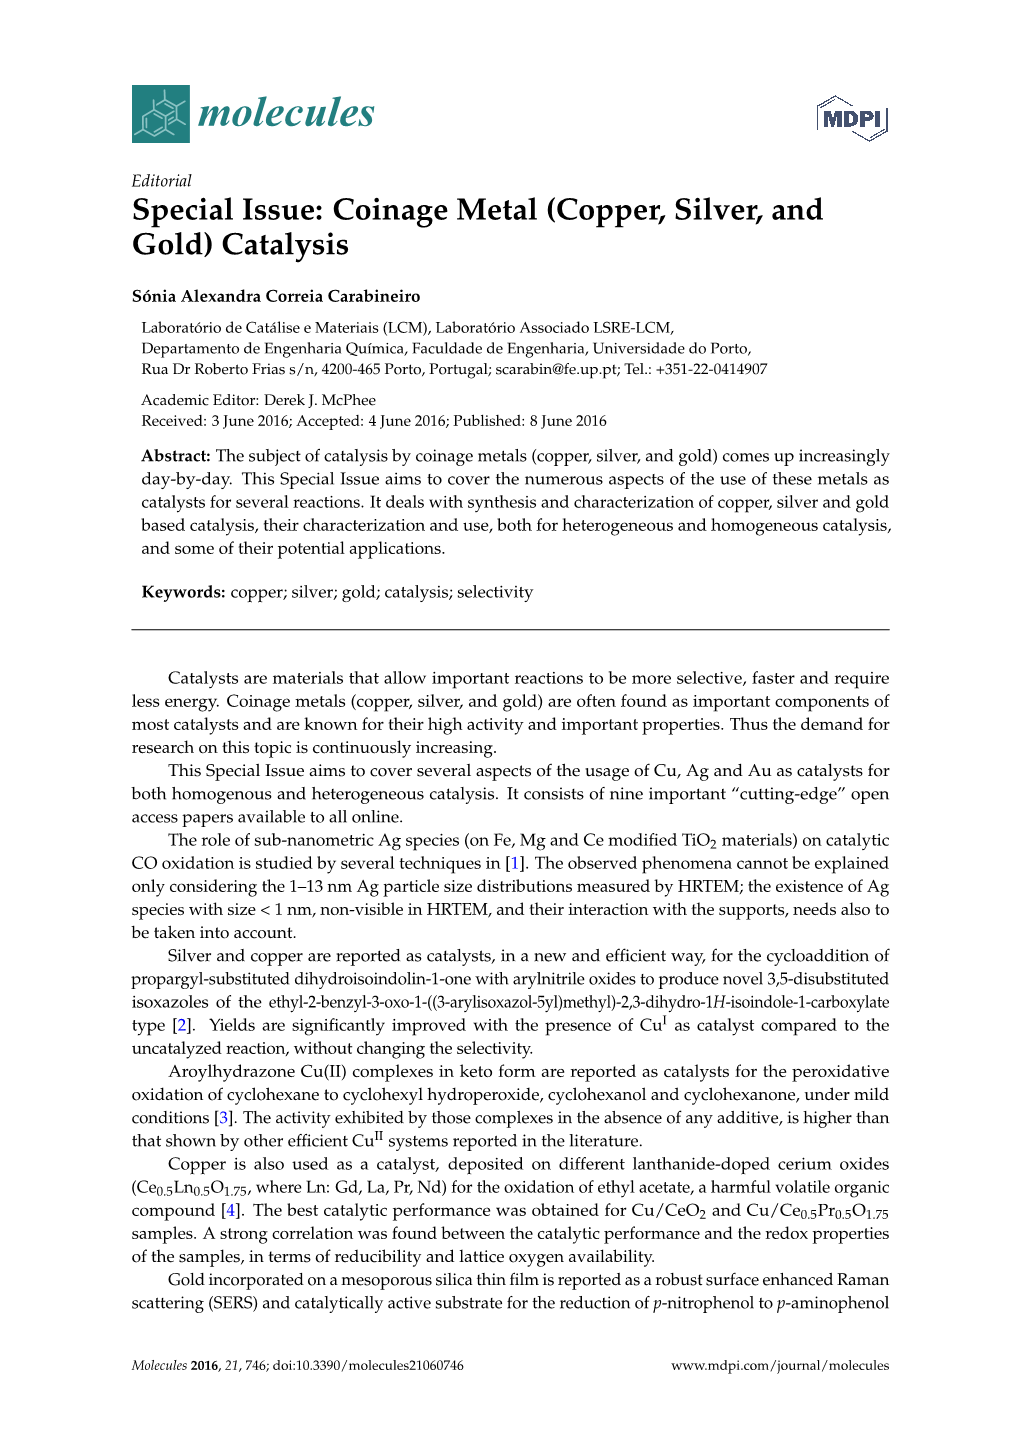 Coinage Metal (Copper, Silver, and Gold) Catalysis